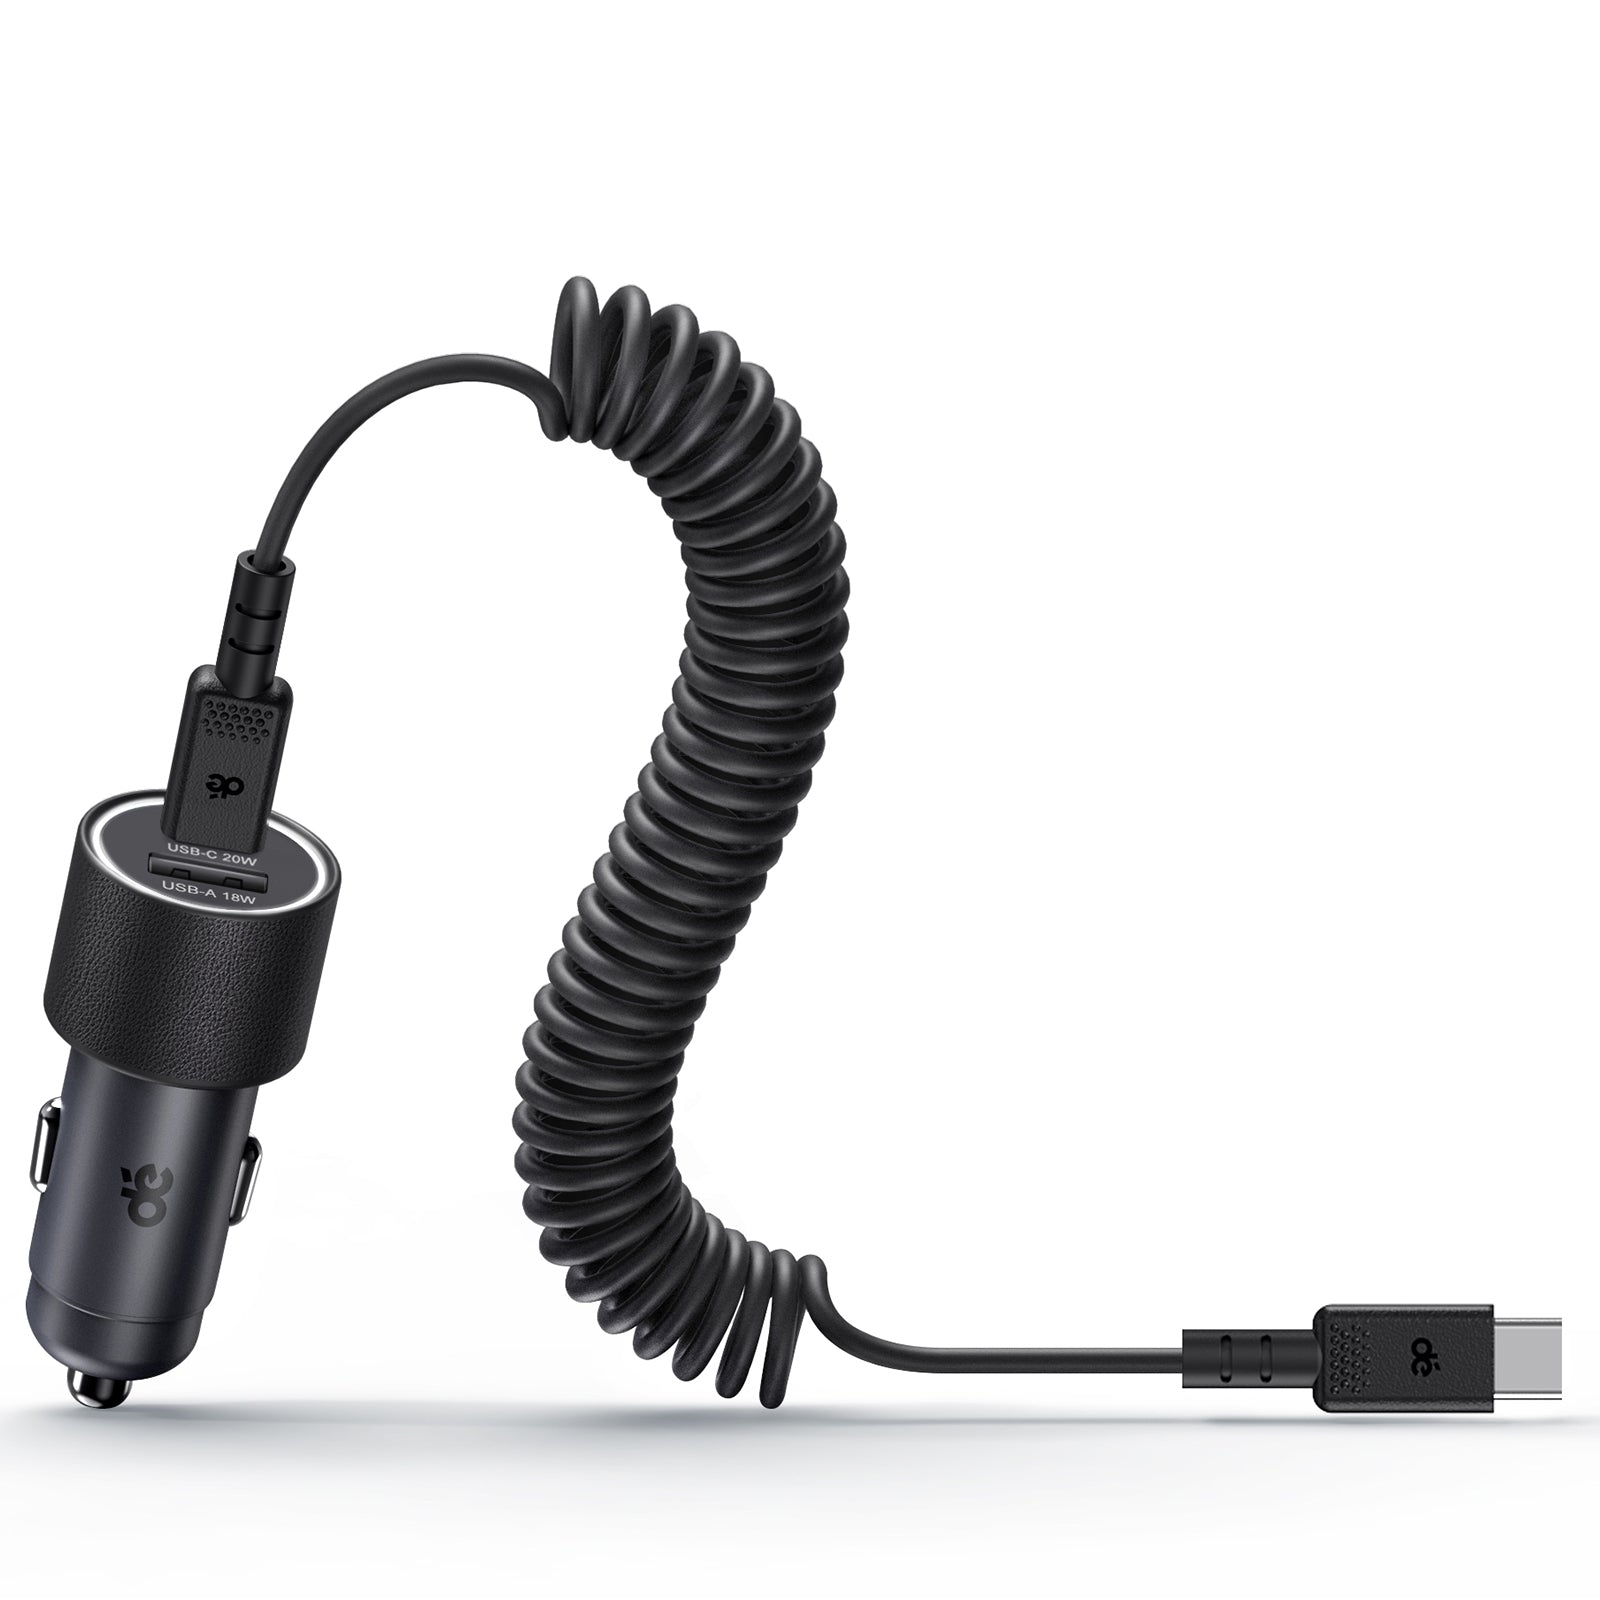  Coiled USB-C to Lightning Cable, Apple Carplay